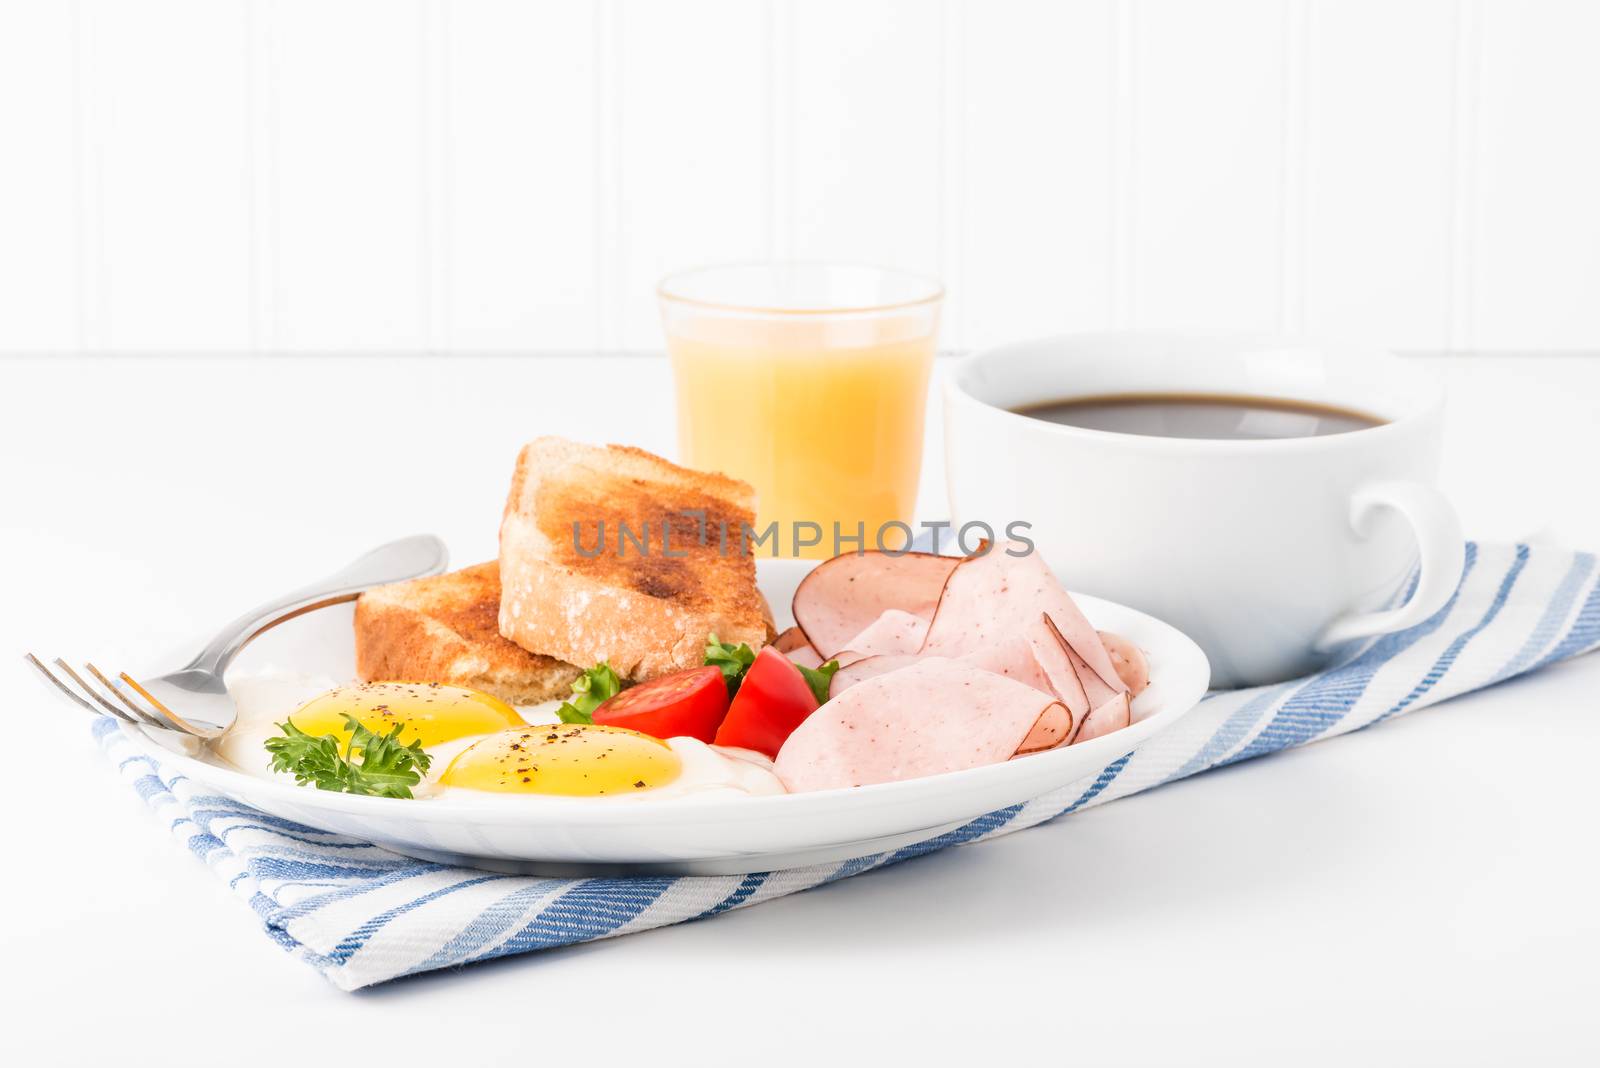 Eggs sunny side up served with ham, coffee and toast.